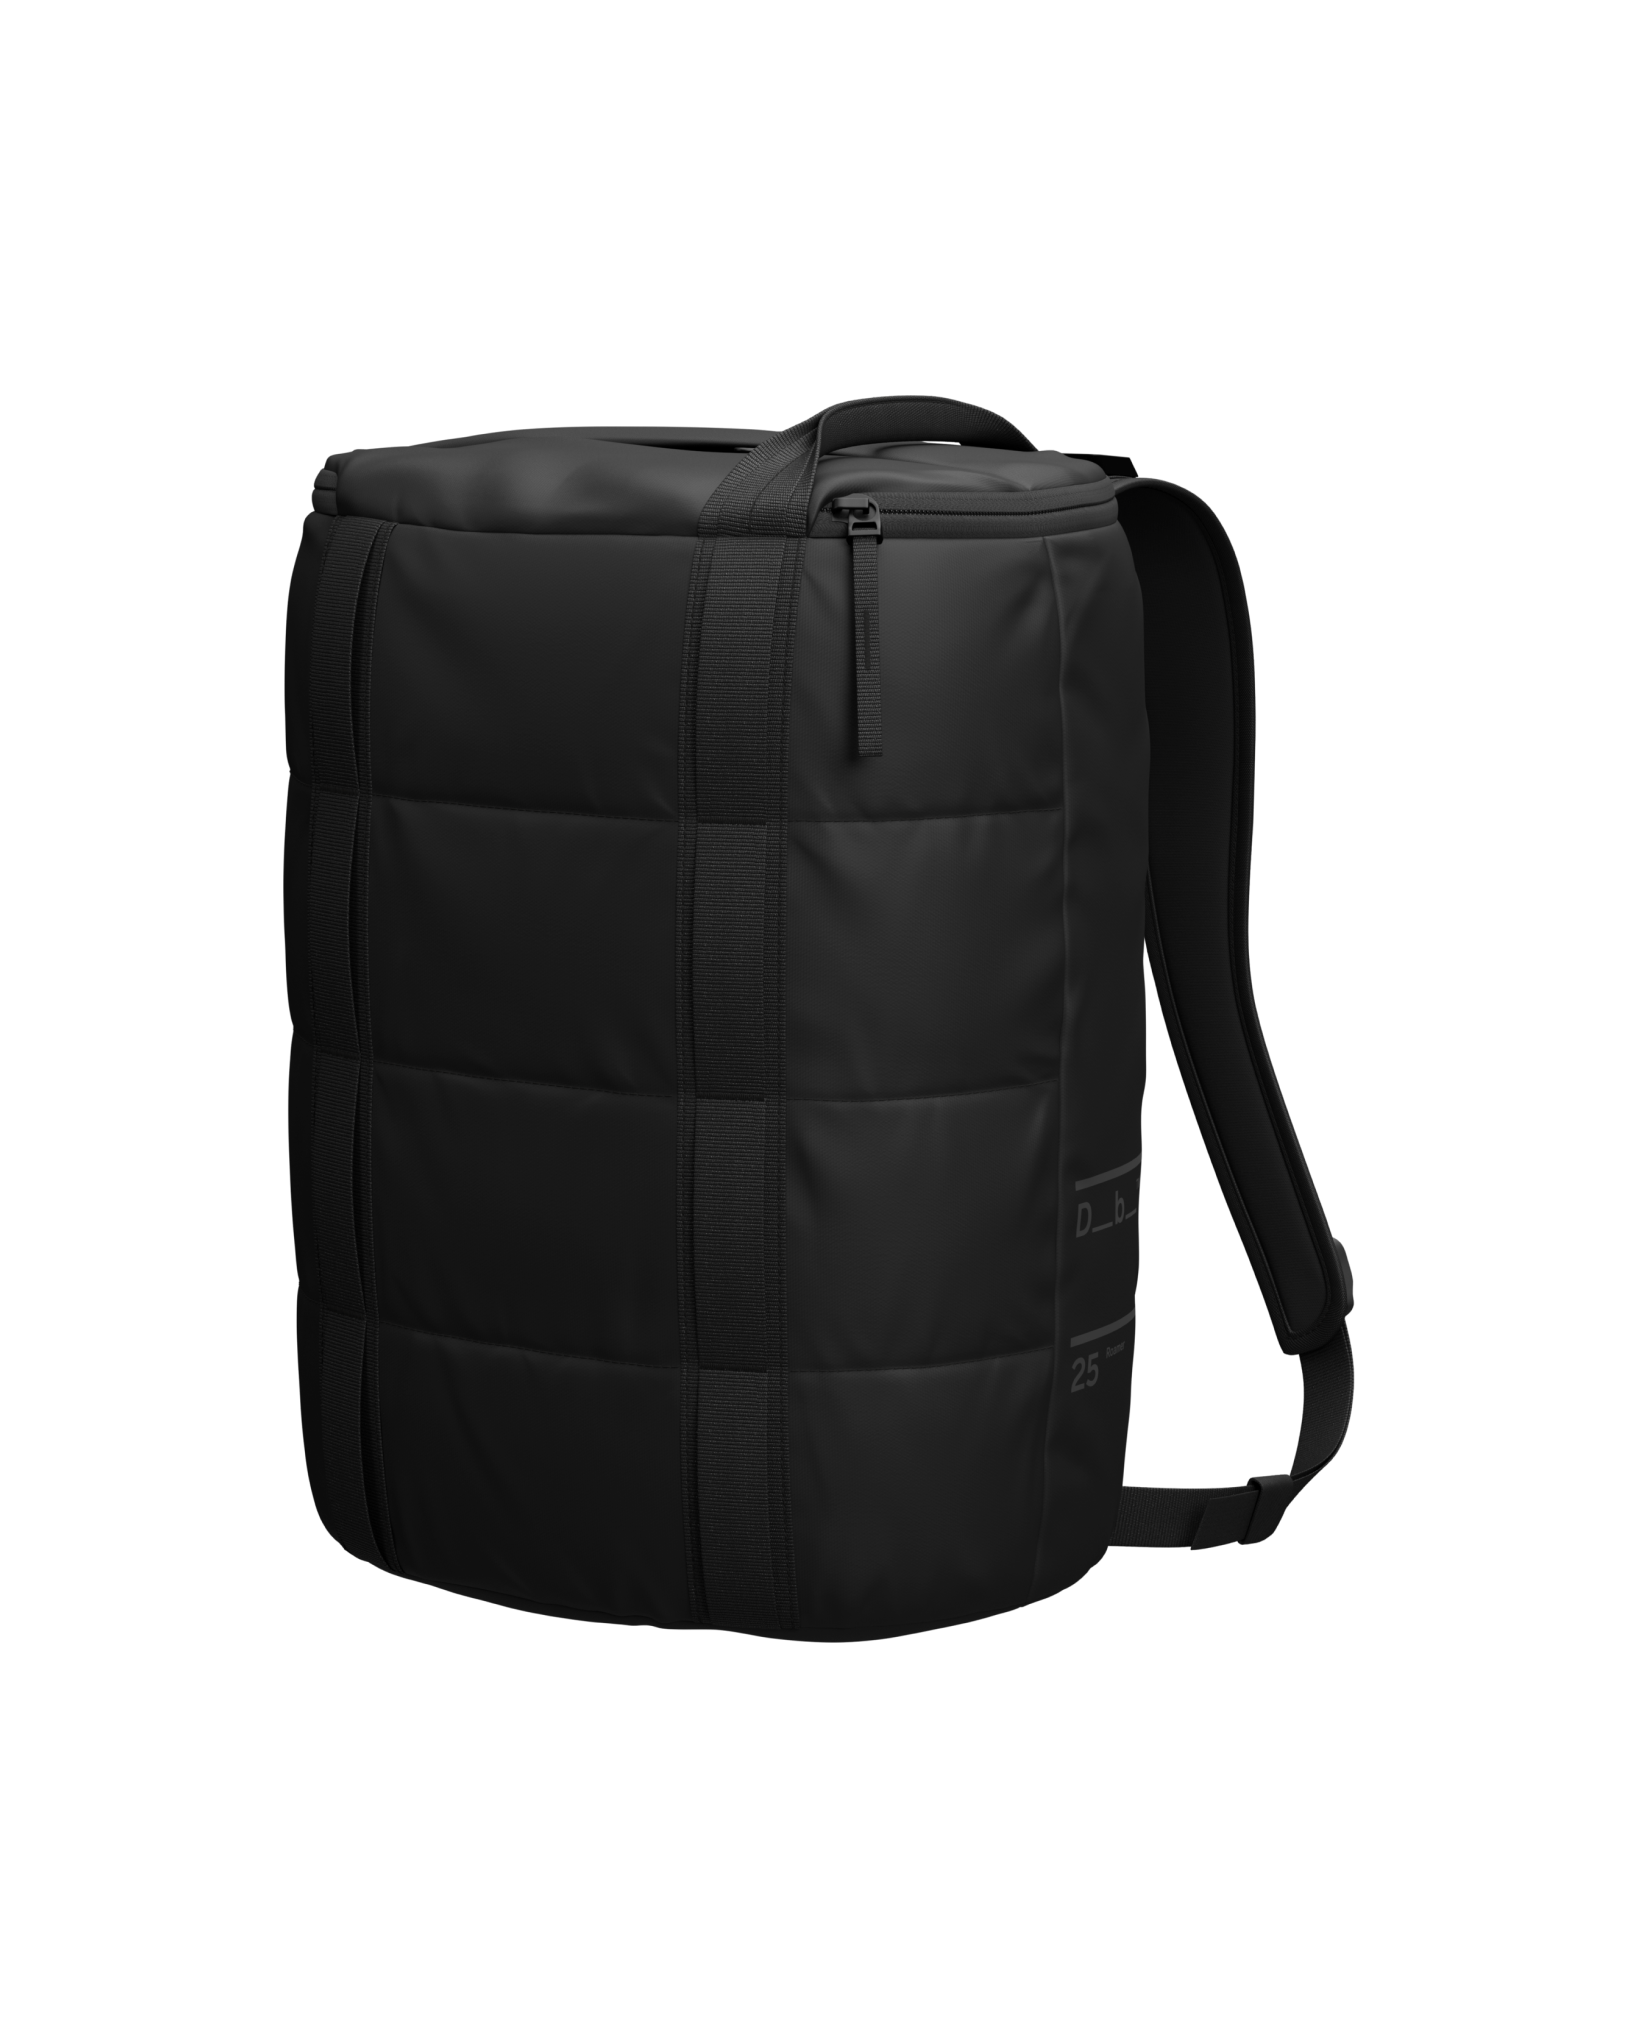 Roamer Duffel Backpack 25L Black Out - Black Out